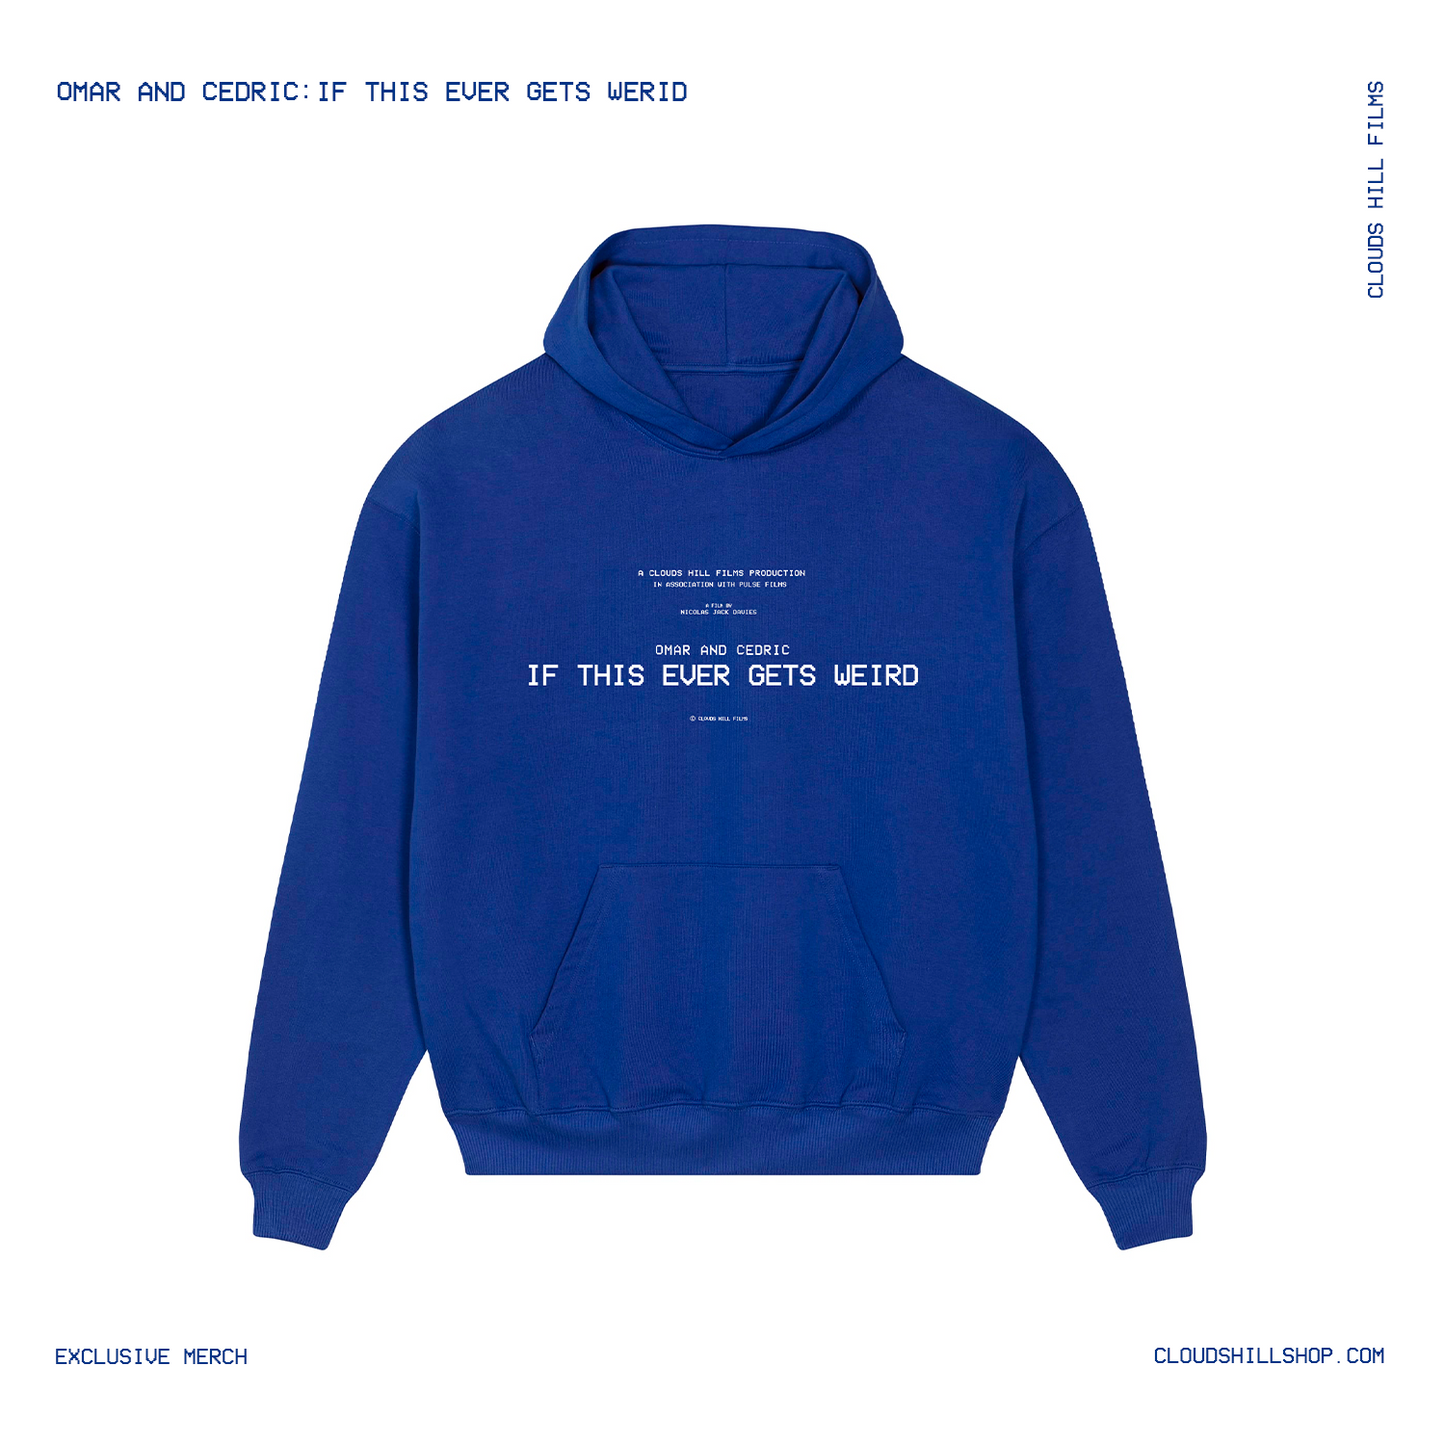 Omar and Cedric - If This Ever Gets Weird Blue Hoodie